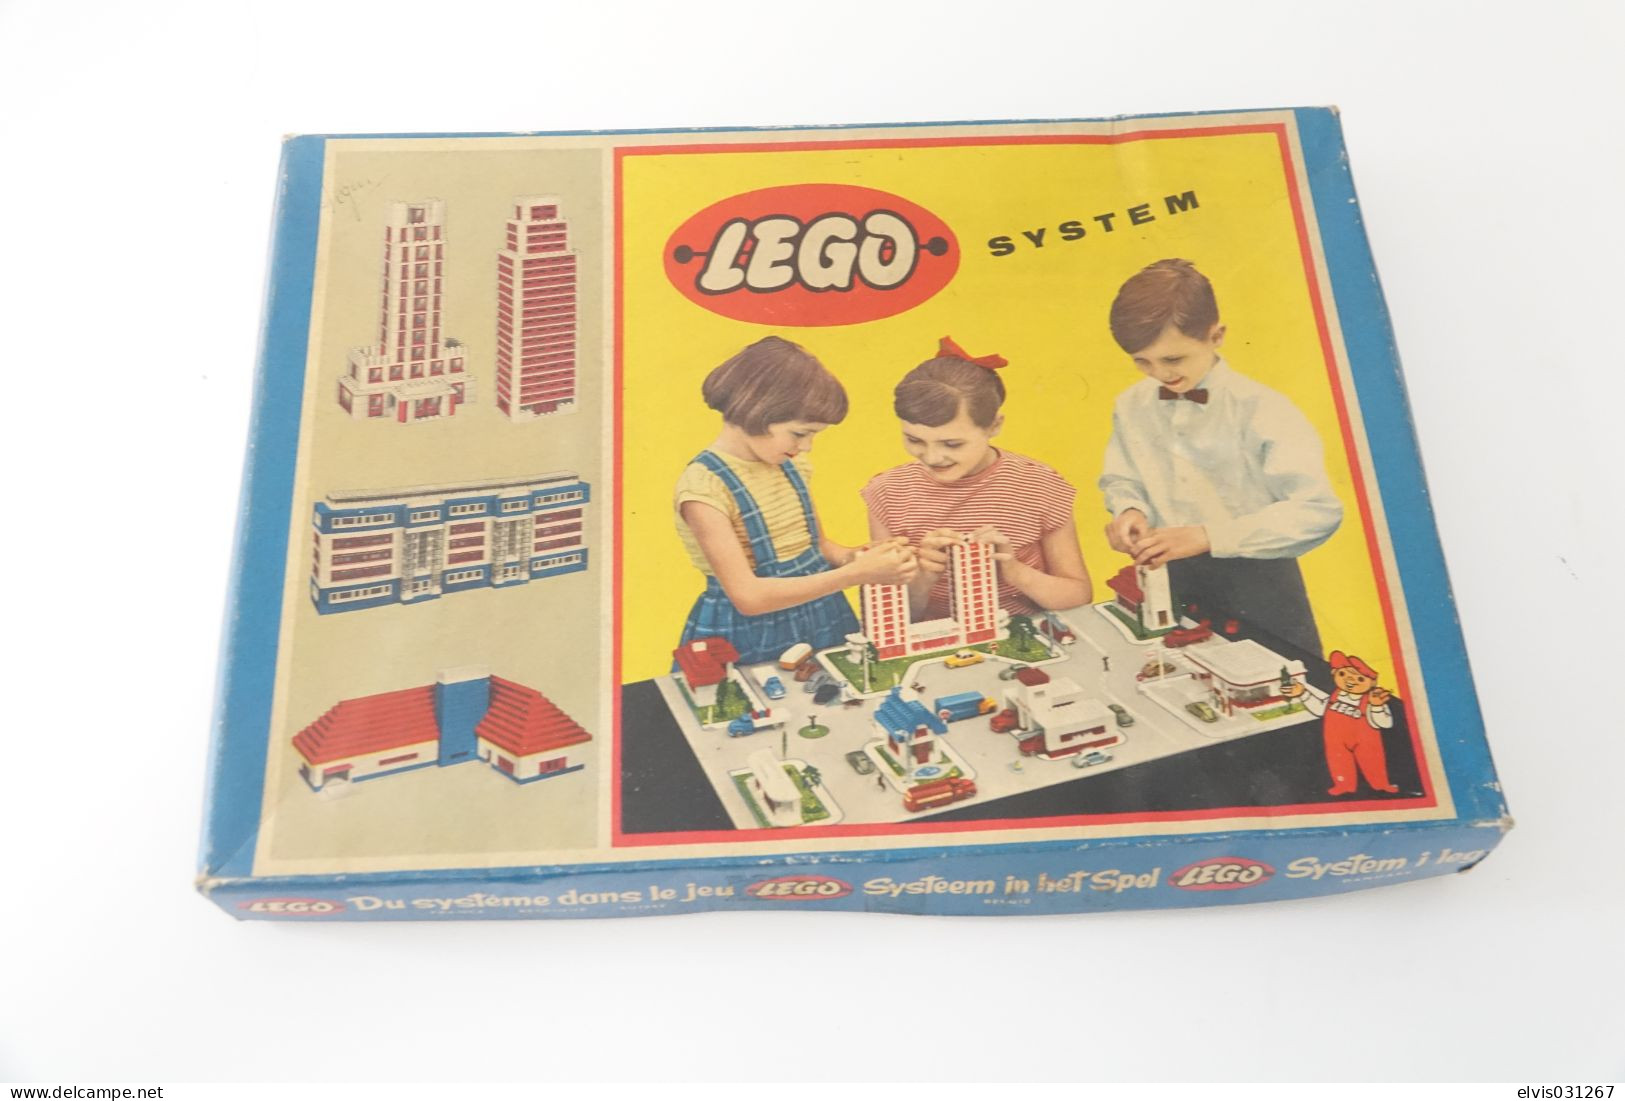 LEGO - 700/3a Gift Package (Lego Mursten) Extremely Rare BOX ONLY - Collector Item - Original Lego 1954 - Vintage - Kataloge